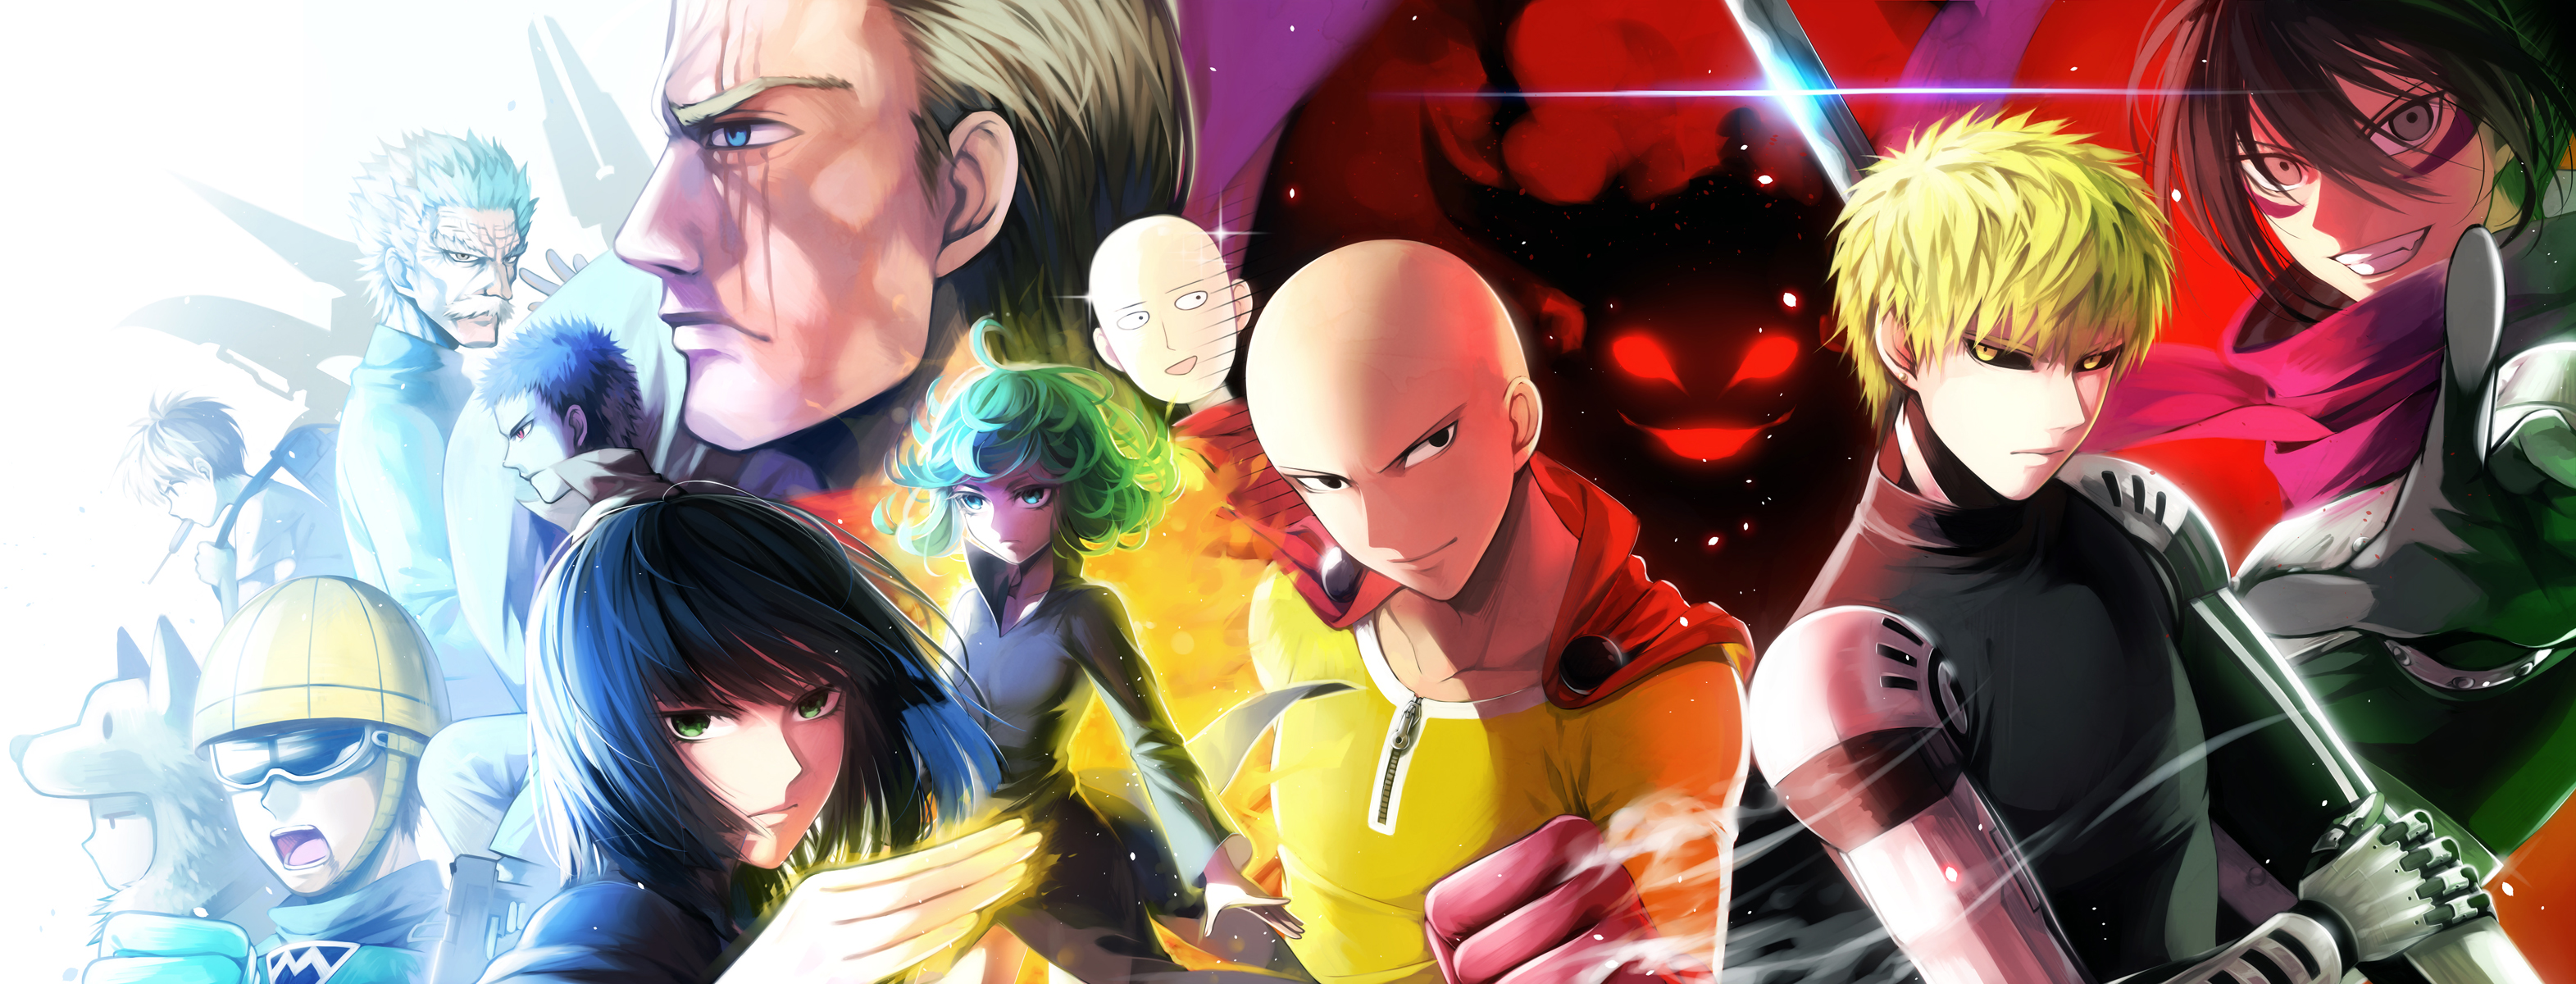 One punch man episode 13 free download